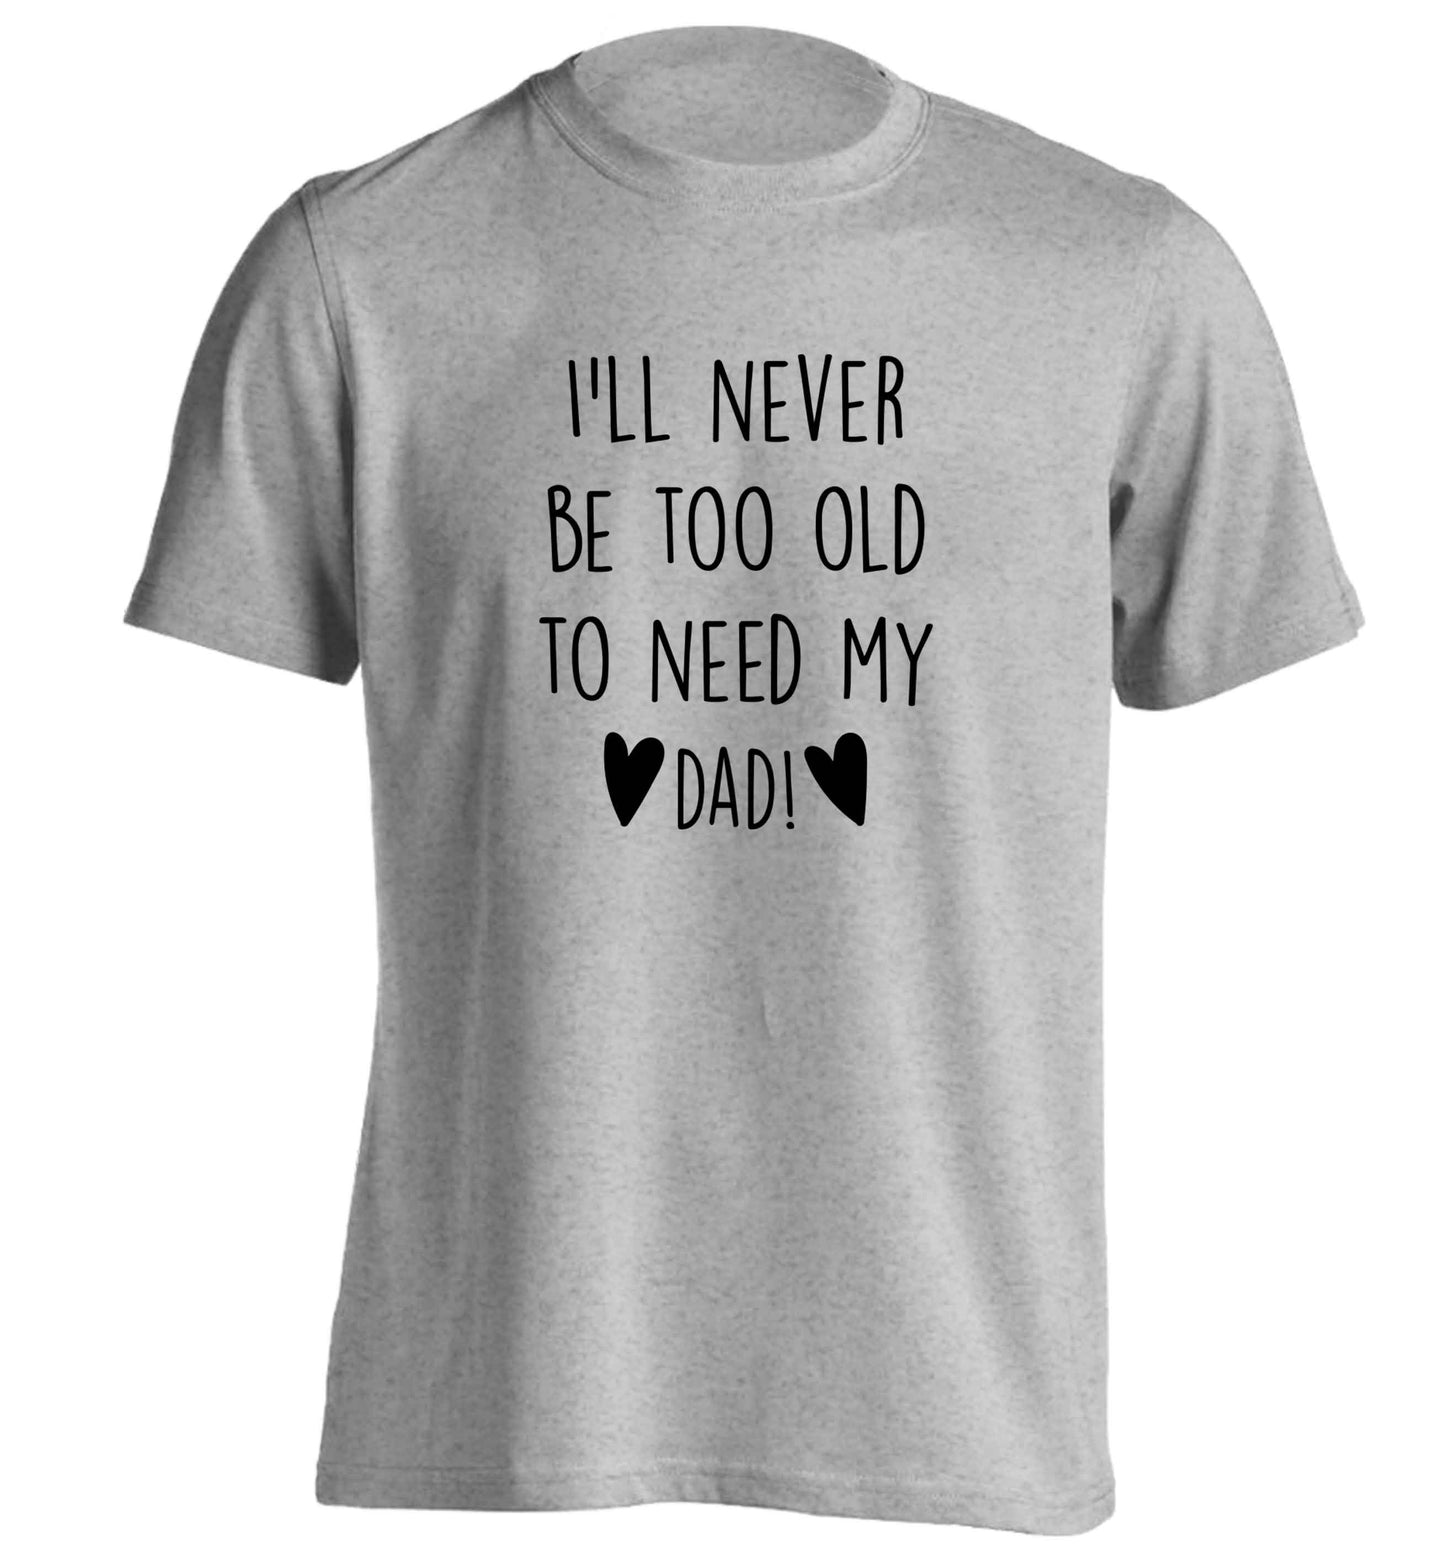 I'll never be too old to need my dad adults unisex grey Tshirt 2XL